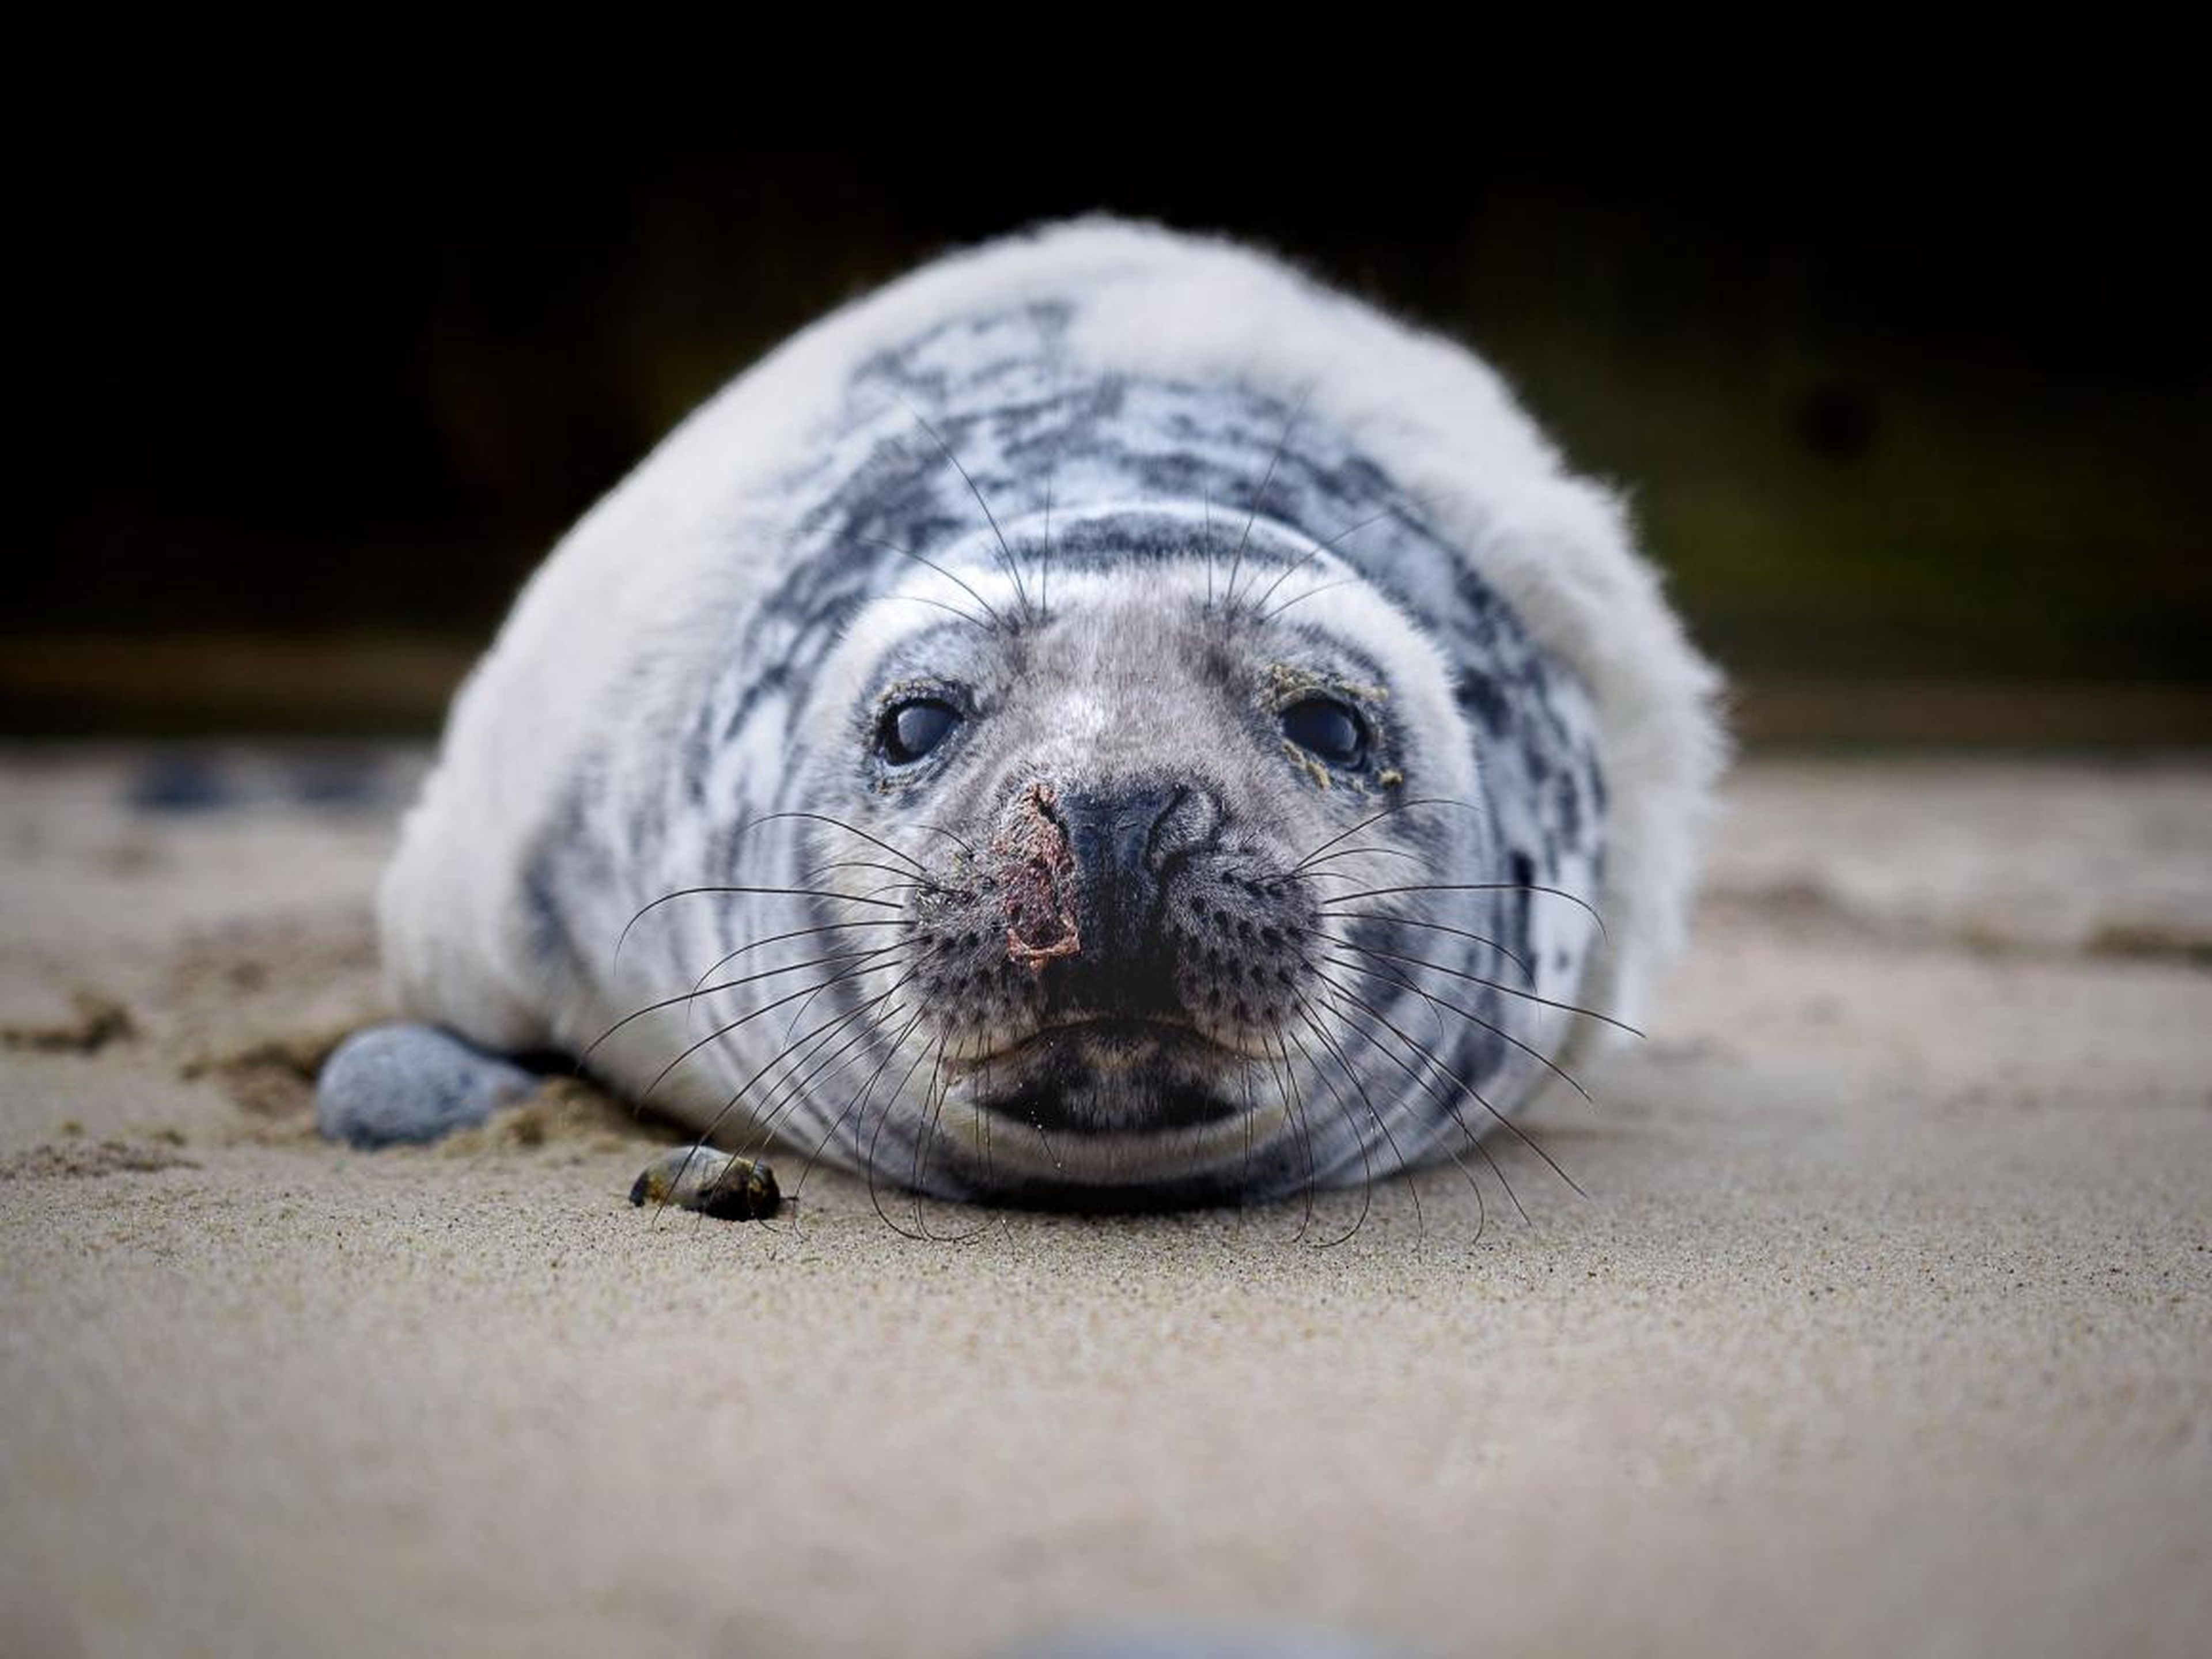 Lastly, Stefan Follows' close encounter with a grey seal pup on a beach near Norfolk in the UK yielded this adorable portrait.